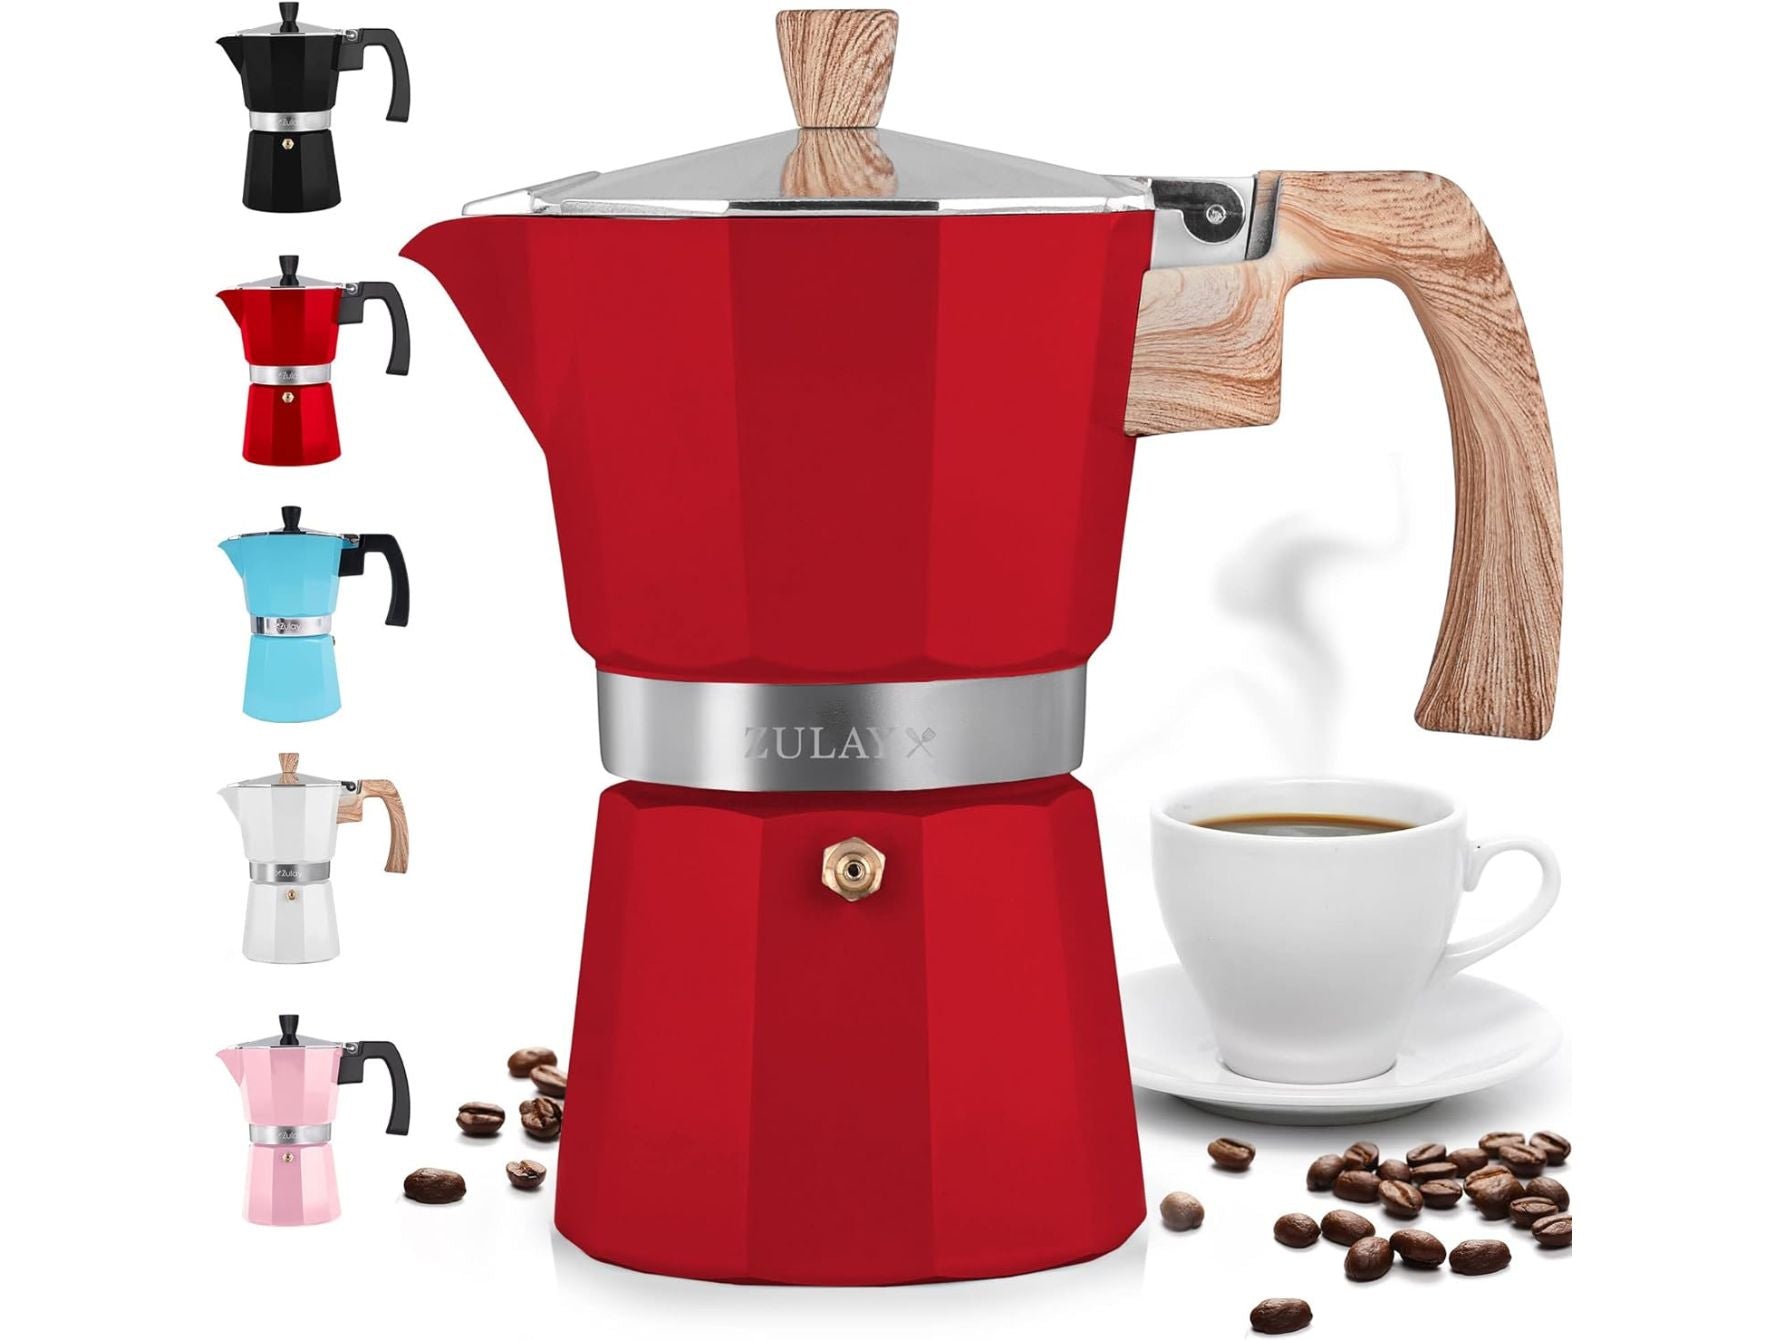 Stovetop Espresso Cup Moka Pot by Zulay Kitchen